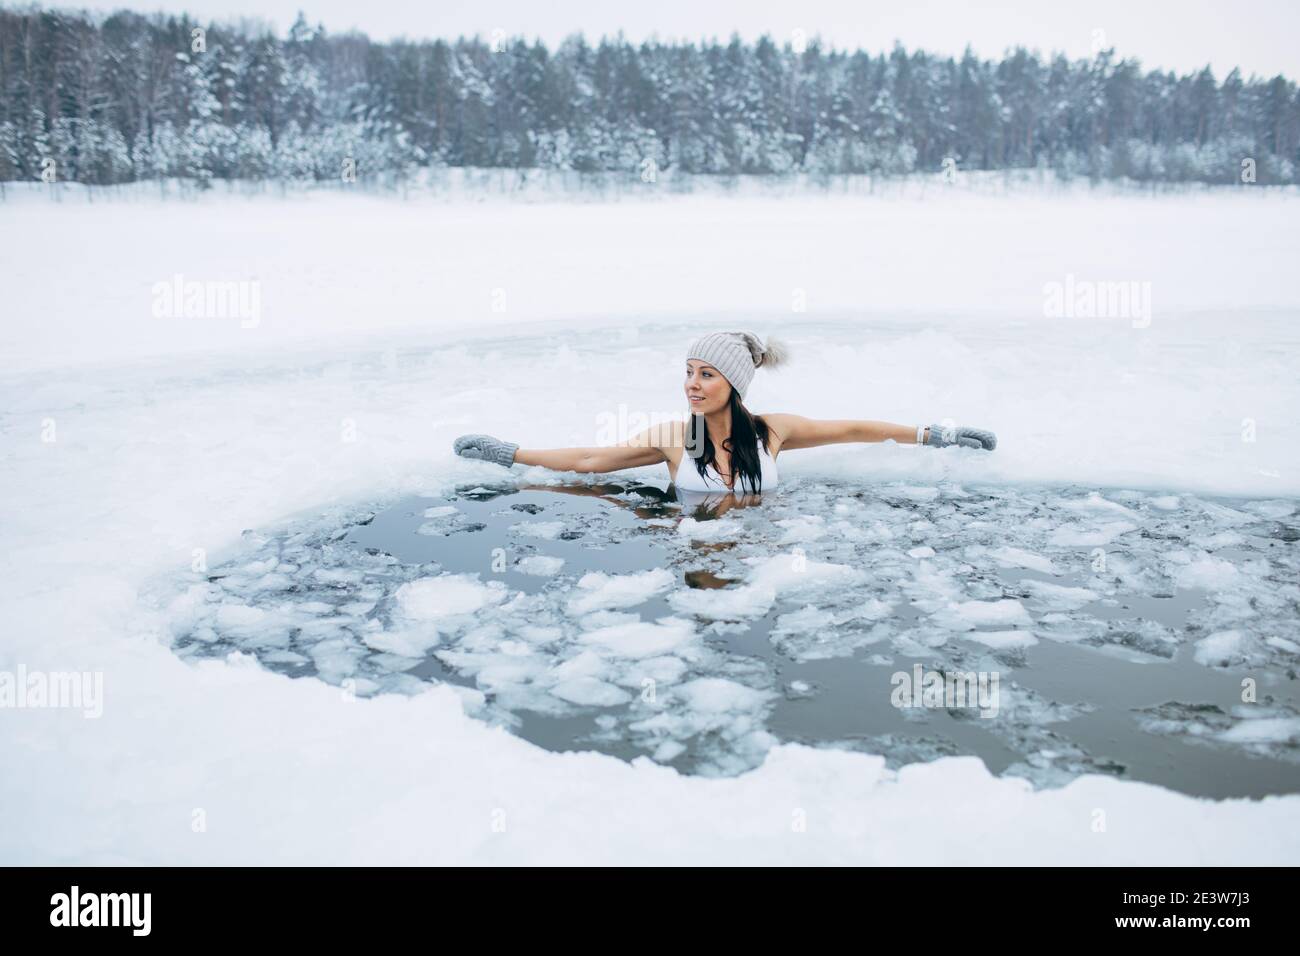 Winter swimming. Woman in frozen lake ice hole. How to swim in cold water. Beautiful young female smiling. Hat and gloves swimming clothes. Stock Photo